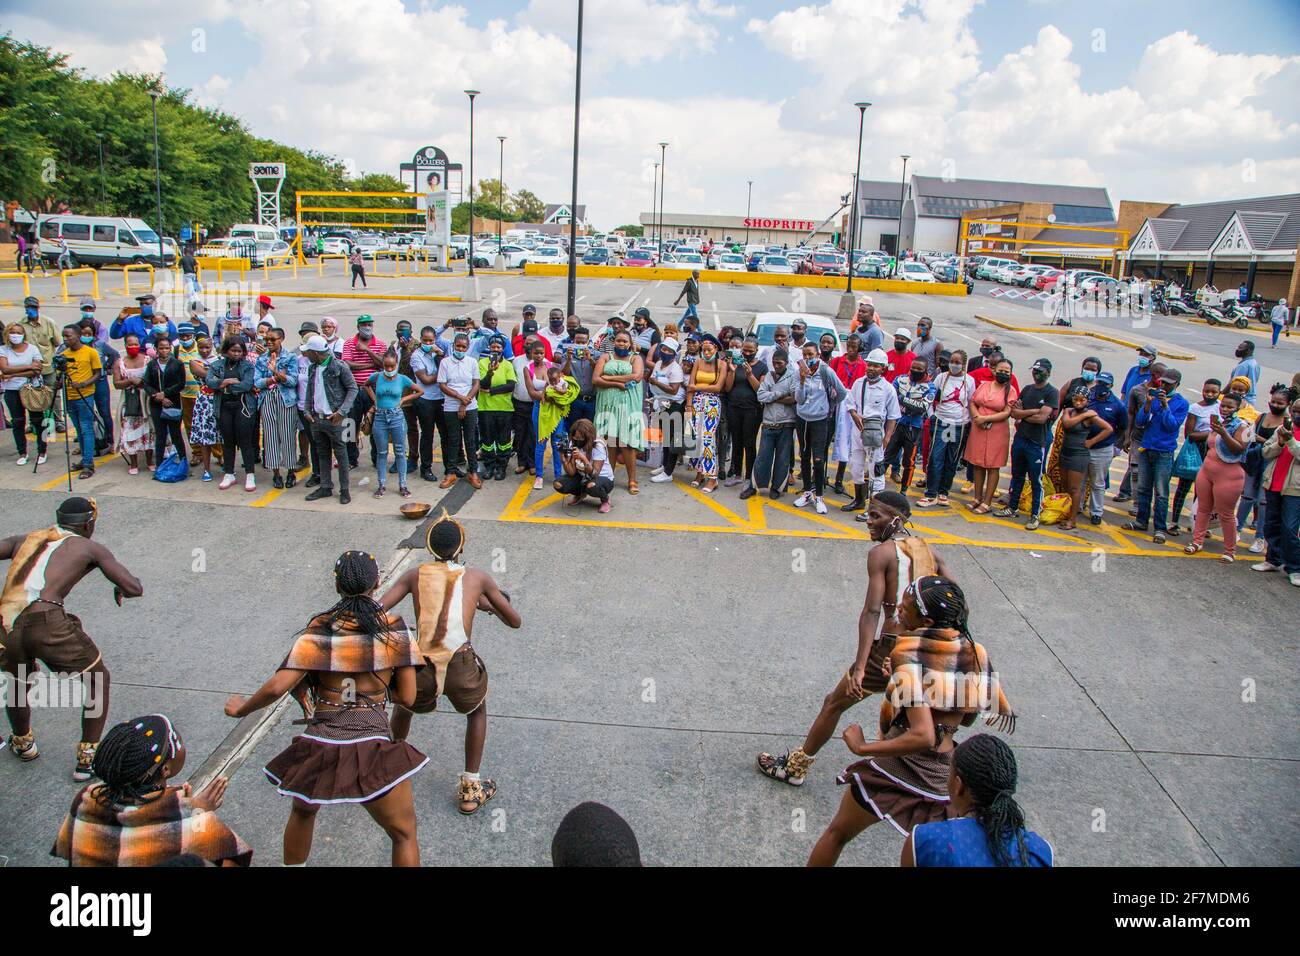 Johannesburg, South Africa. 08th Apr, 2021. People look on as demonstrators dressed in traditional attire dance during a protest outside the Boulders Shopping Centre, after a store manager asked a man to leave for being dressed in the traditional Ndebele attire. (Photo by Thabo Jaiyesimi/SOPA Images/Sipa USA) Credit: Sipa USA/Alamy Live News Stock Photo